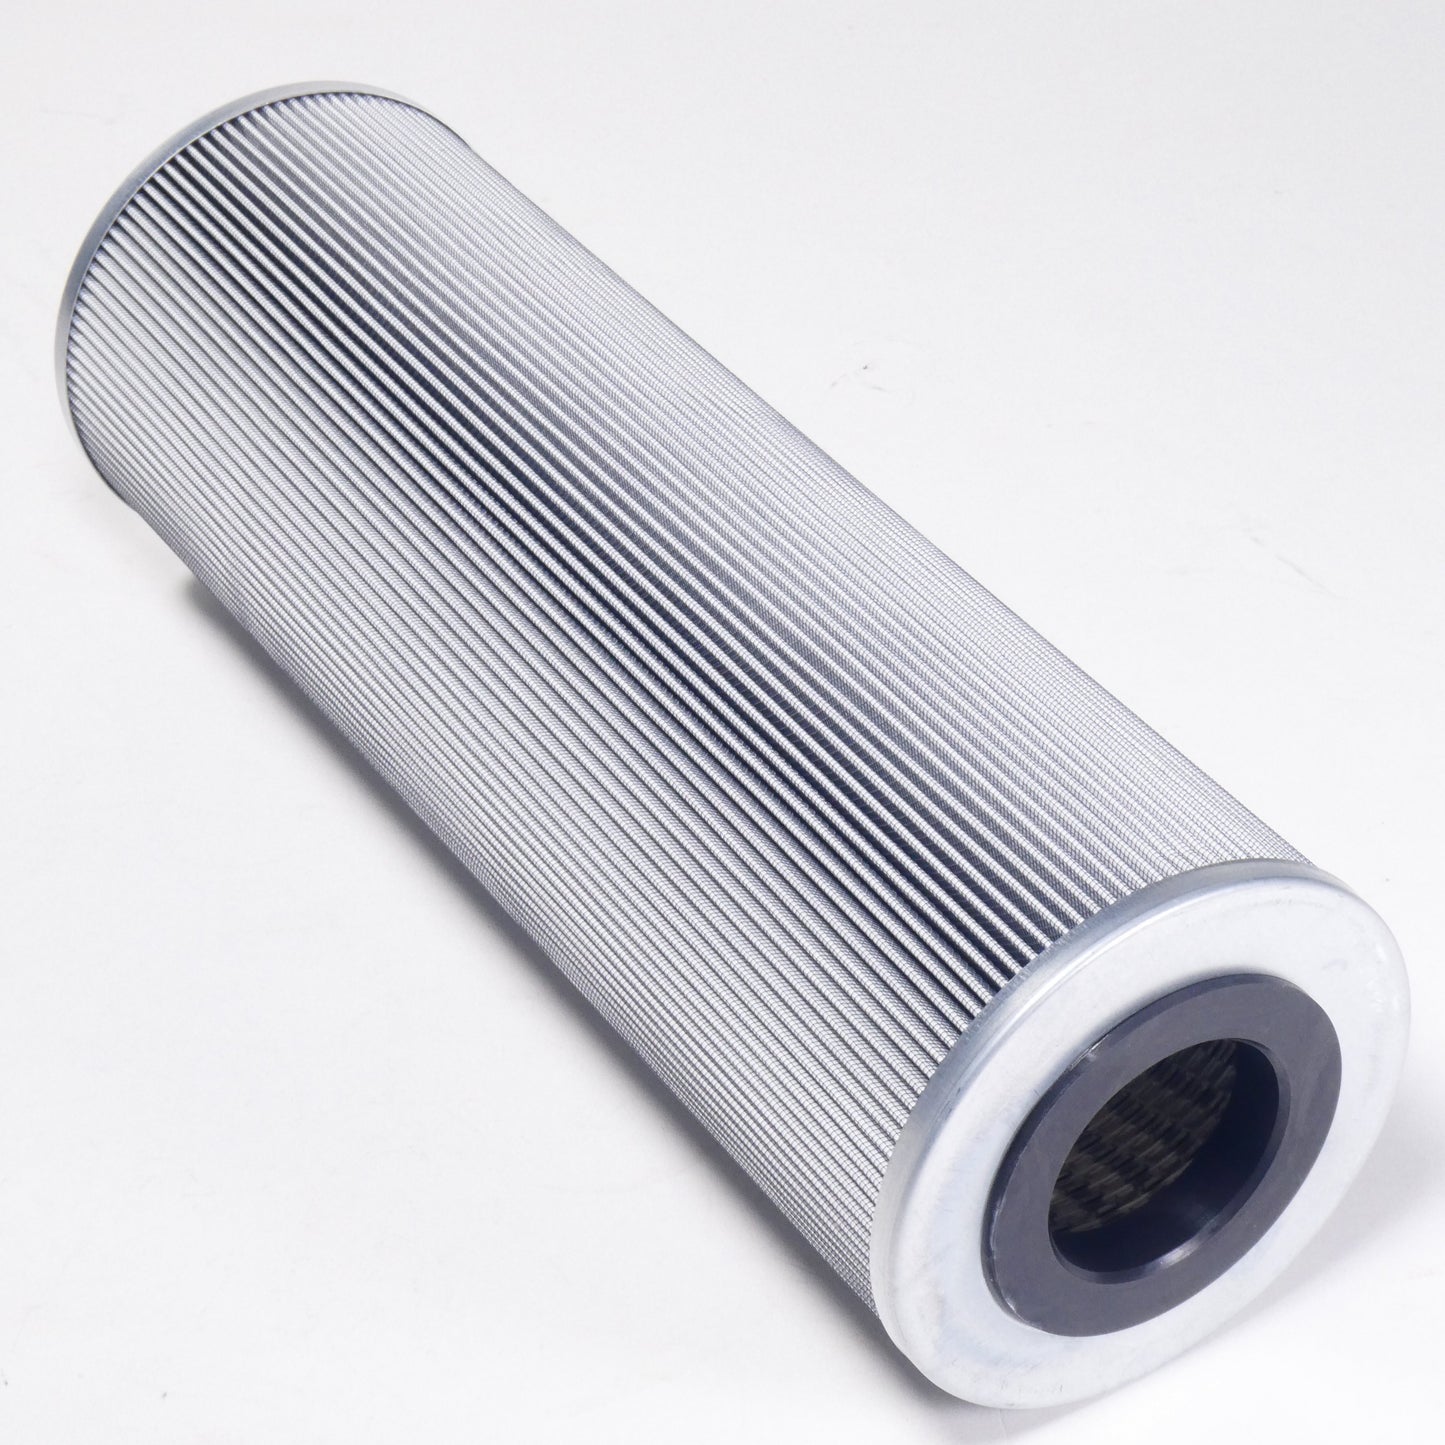 Hydrafil Replacement Filter Element for Hilco PH718-03-CNVGE